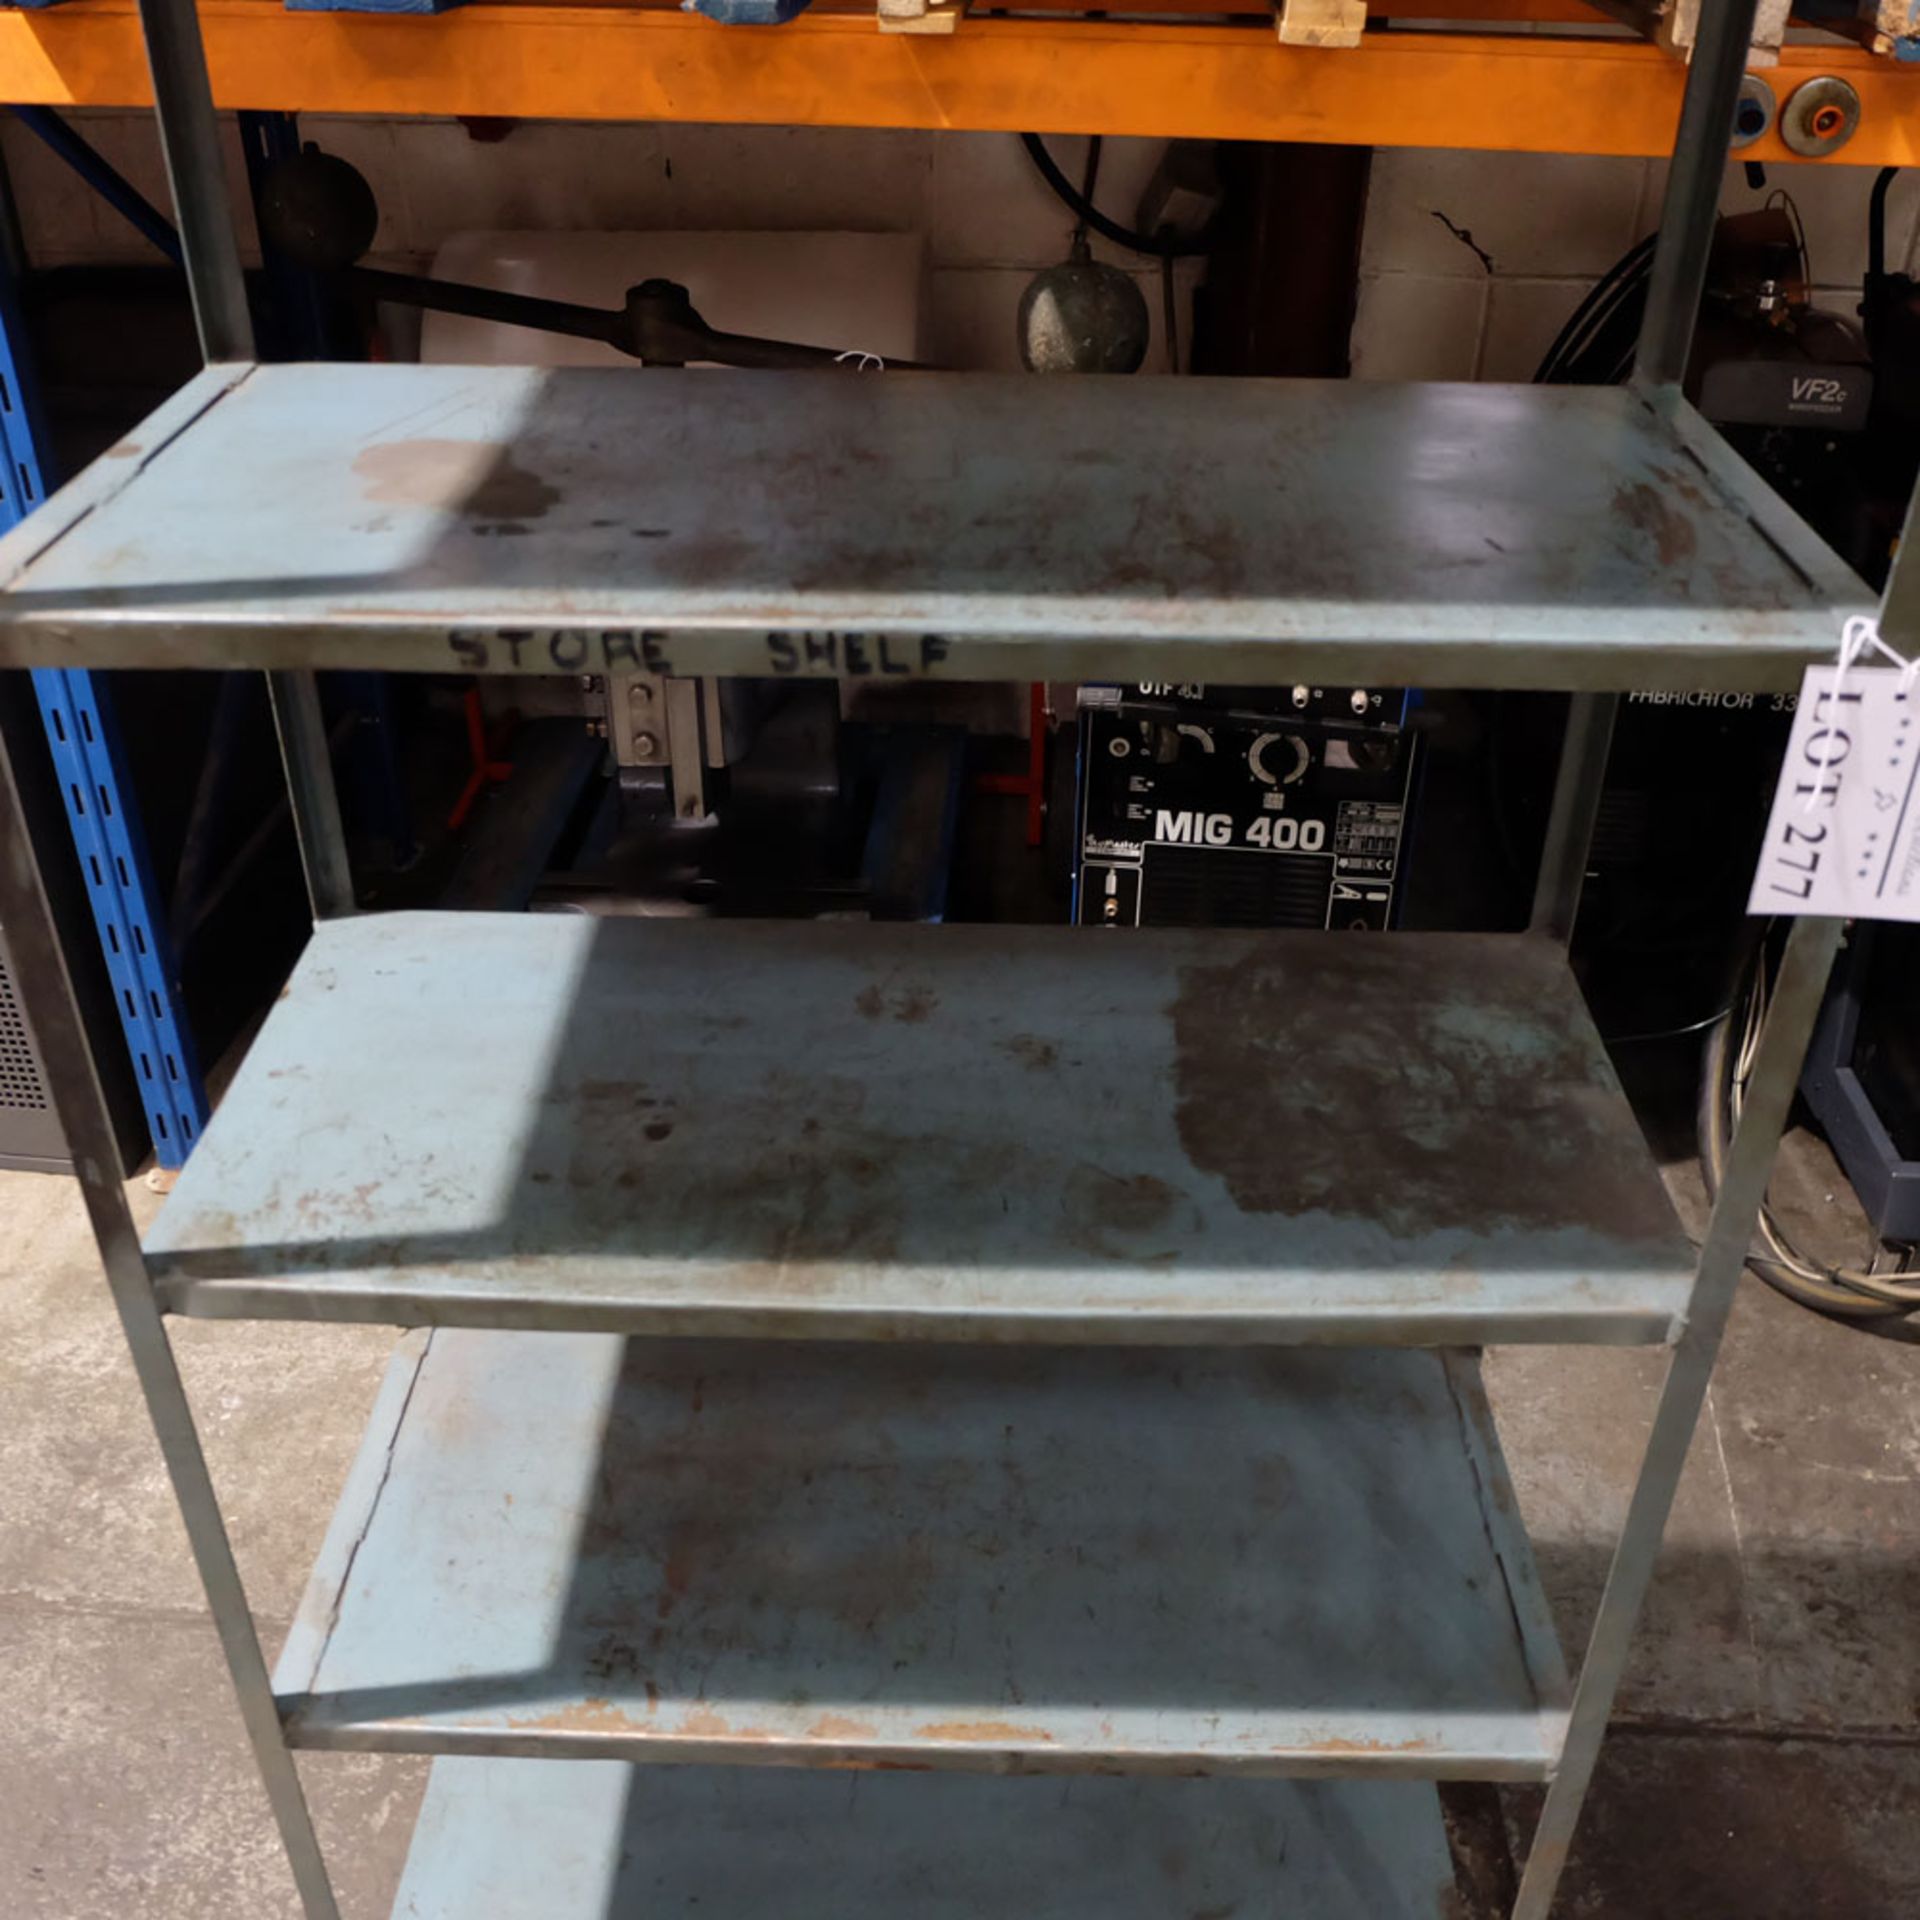 Steel Shelves. Shelf Size Approx 36" x 16". Overall Height 72". - Image 4 of 5